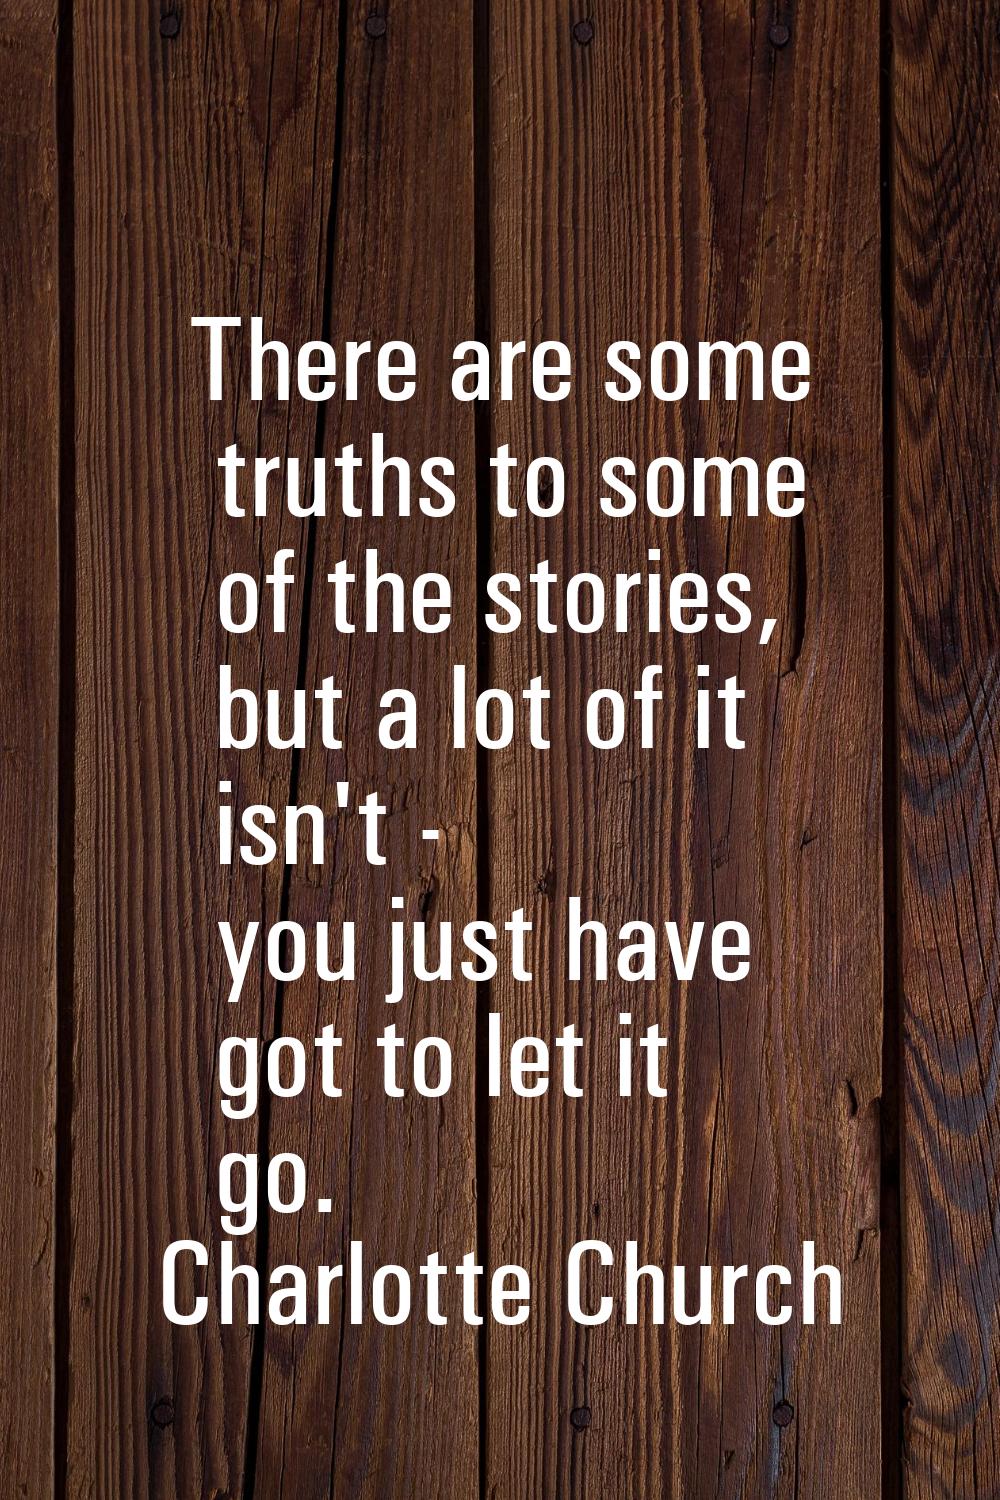 There are some truths to some of the stories, but a lot of it isn't - you just have got to let it g